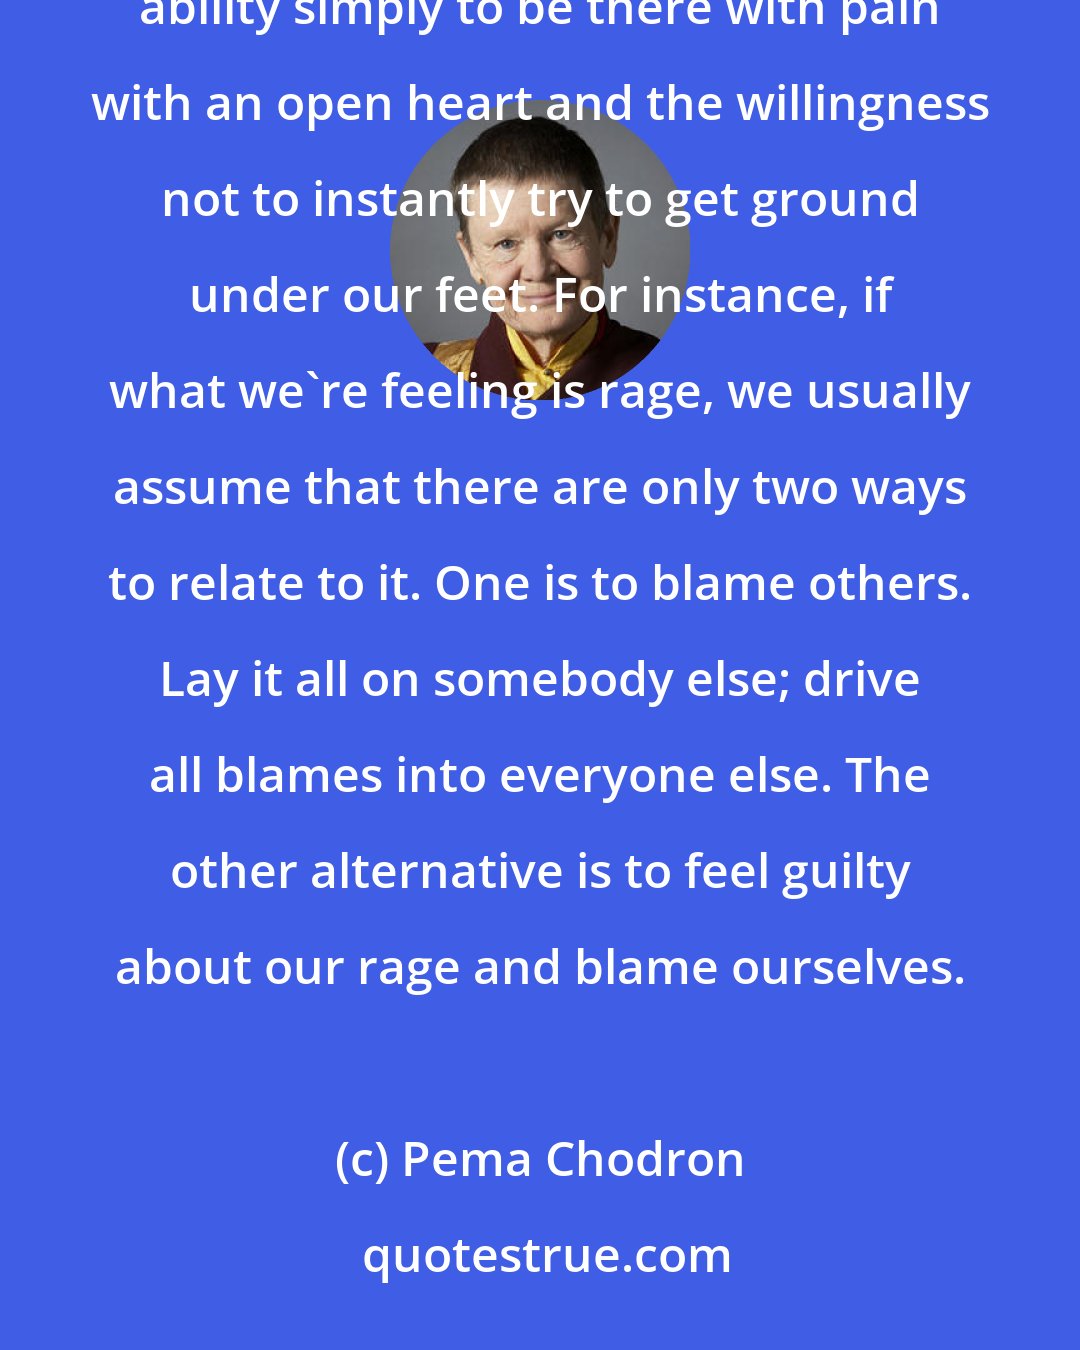 Pema Chodron: Buddhist words such as compassion and emptiness don't mean much until we start cultivating our innate ability simply to be there with pain with an open heart and the willingness not to instantly try to get ground under our feet. For instance, if what we're feeling is rage, we usually assume that there are only two ways to relate to it. One is to blame others. Lay it all on somebody else; drive all blames into everyone else. The other alternative is to feel guilty about our rage and blame ourselves.